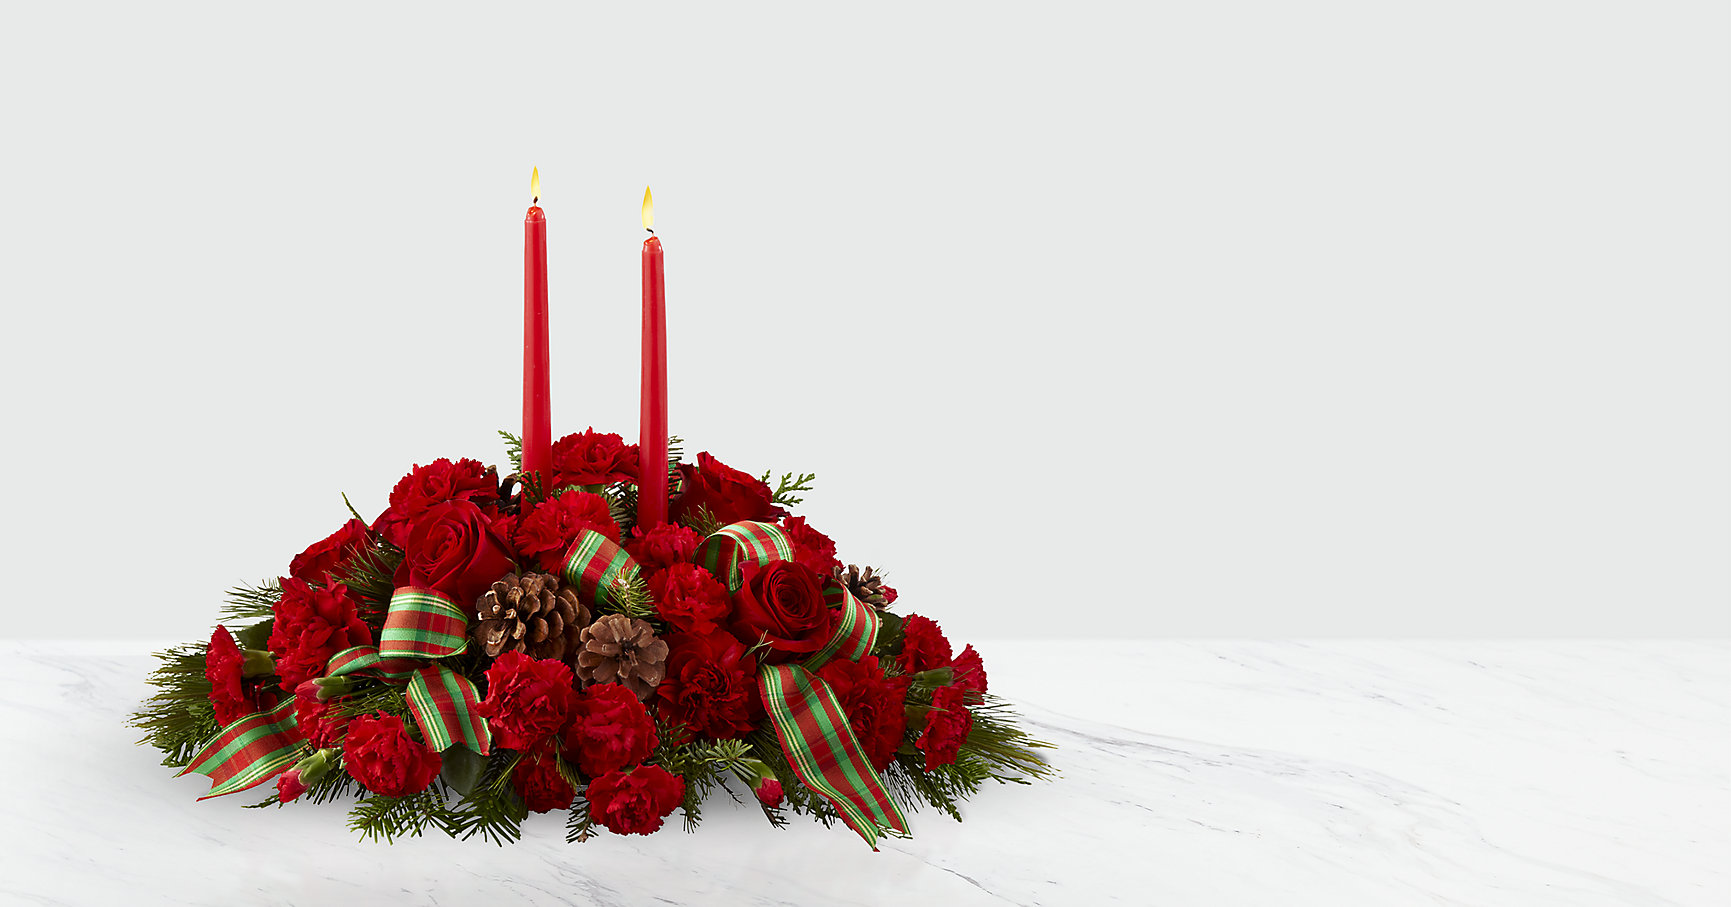 The FTD® Holiday Classics™ Centerpiece